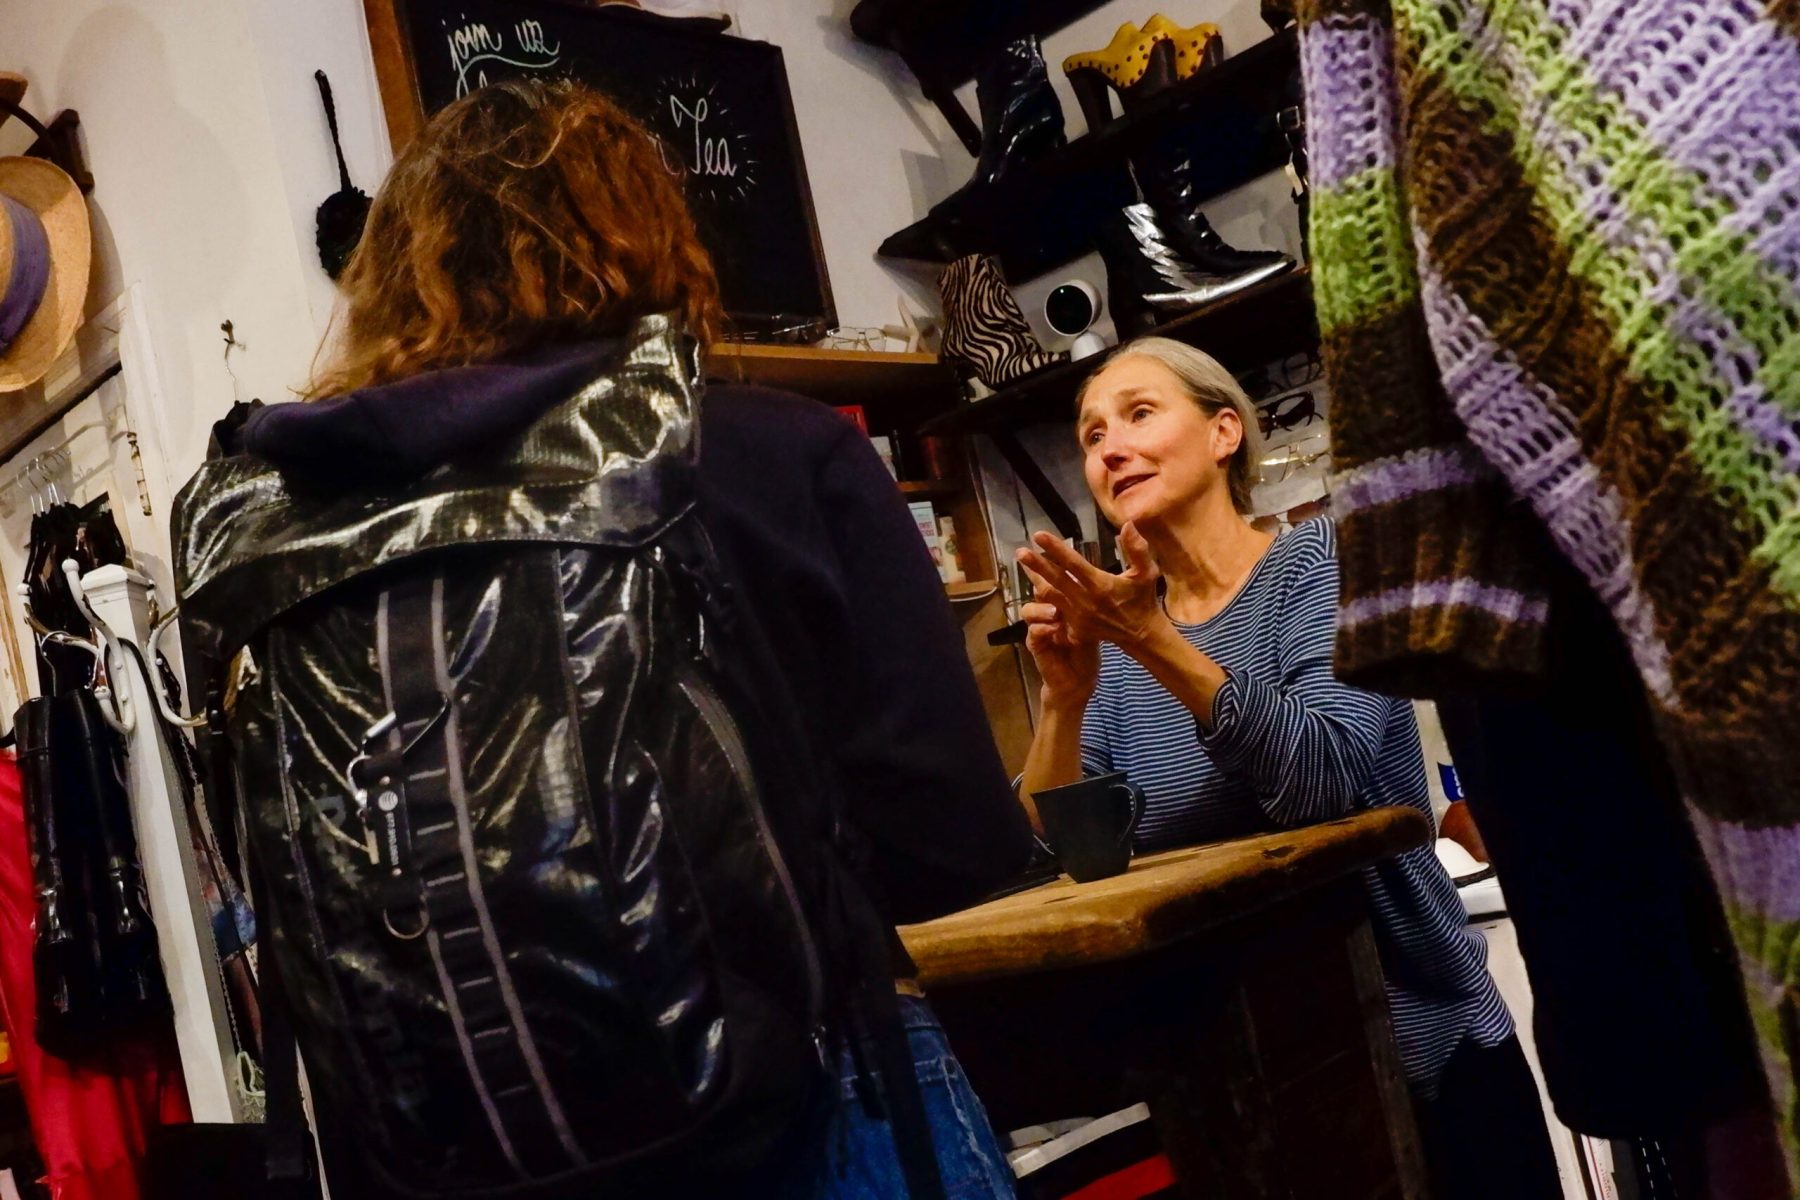 It's the first time student Ruby found her way into Malin's shop and the women exchange stories for half an hour.